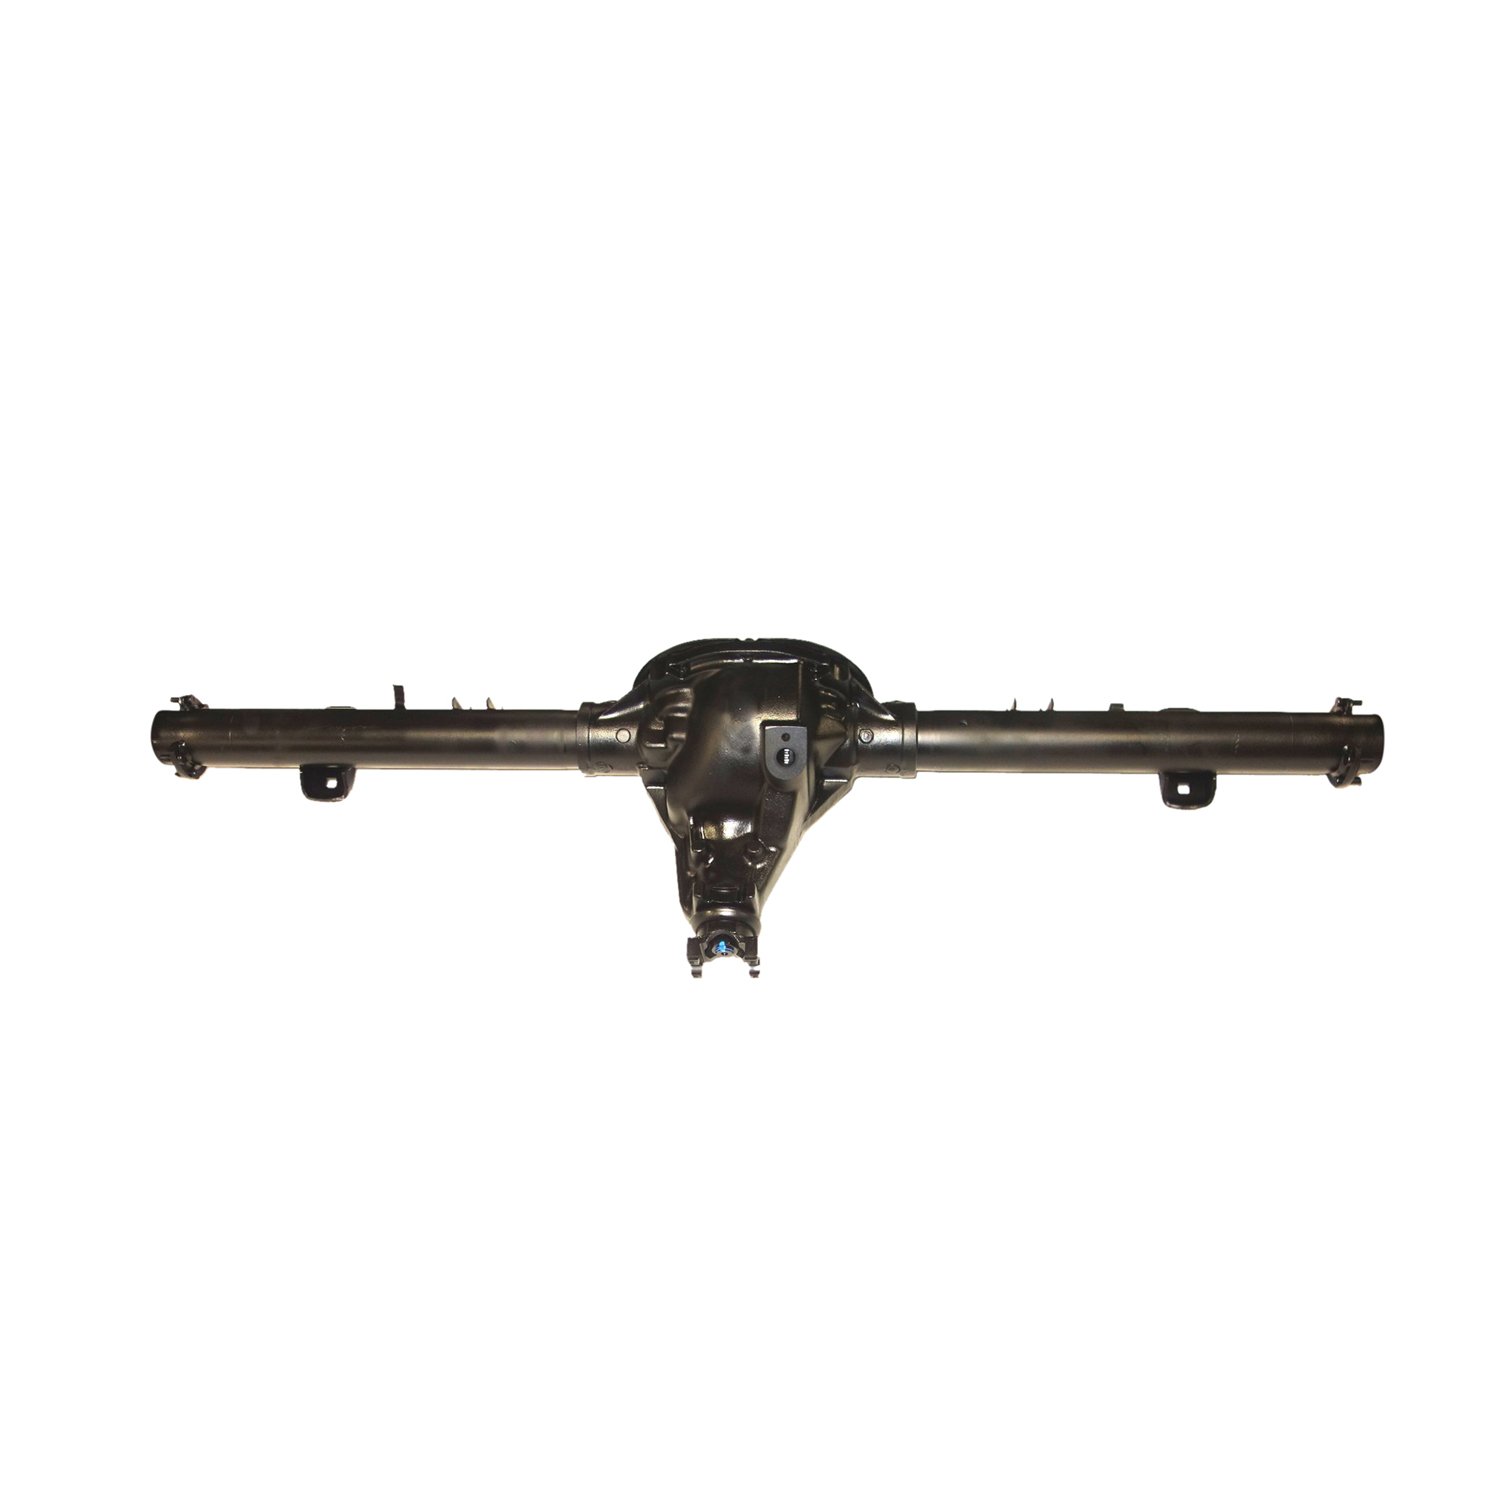 Remanufactured Axle Assy Chy 8.25" 89-93 1/2 Ton,D100, D150, 3.90 , 2wd, Posi LSD w/ ABS